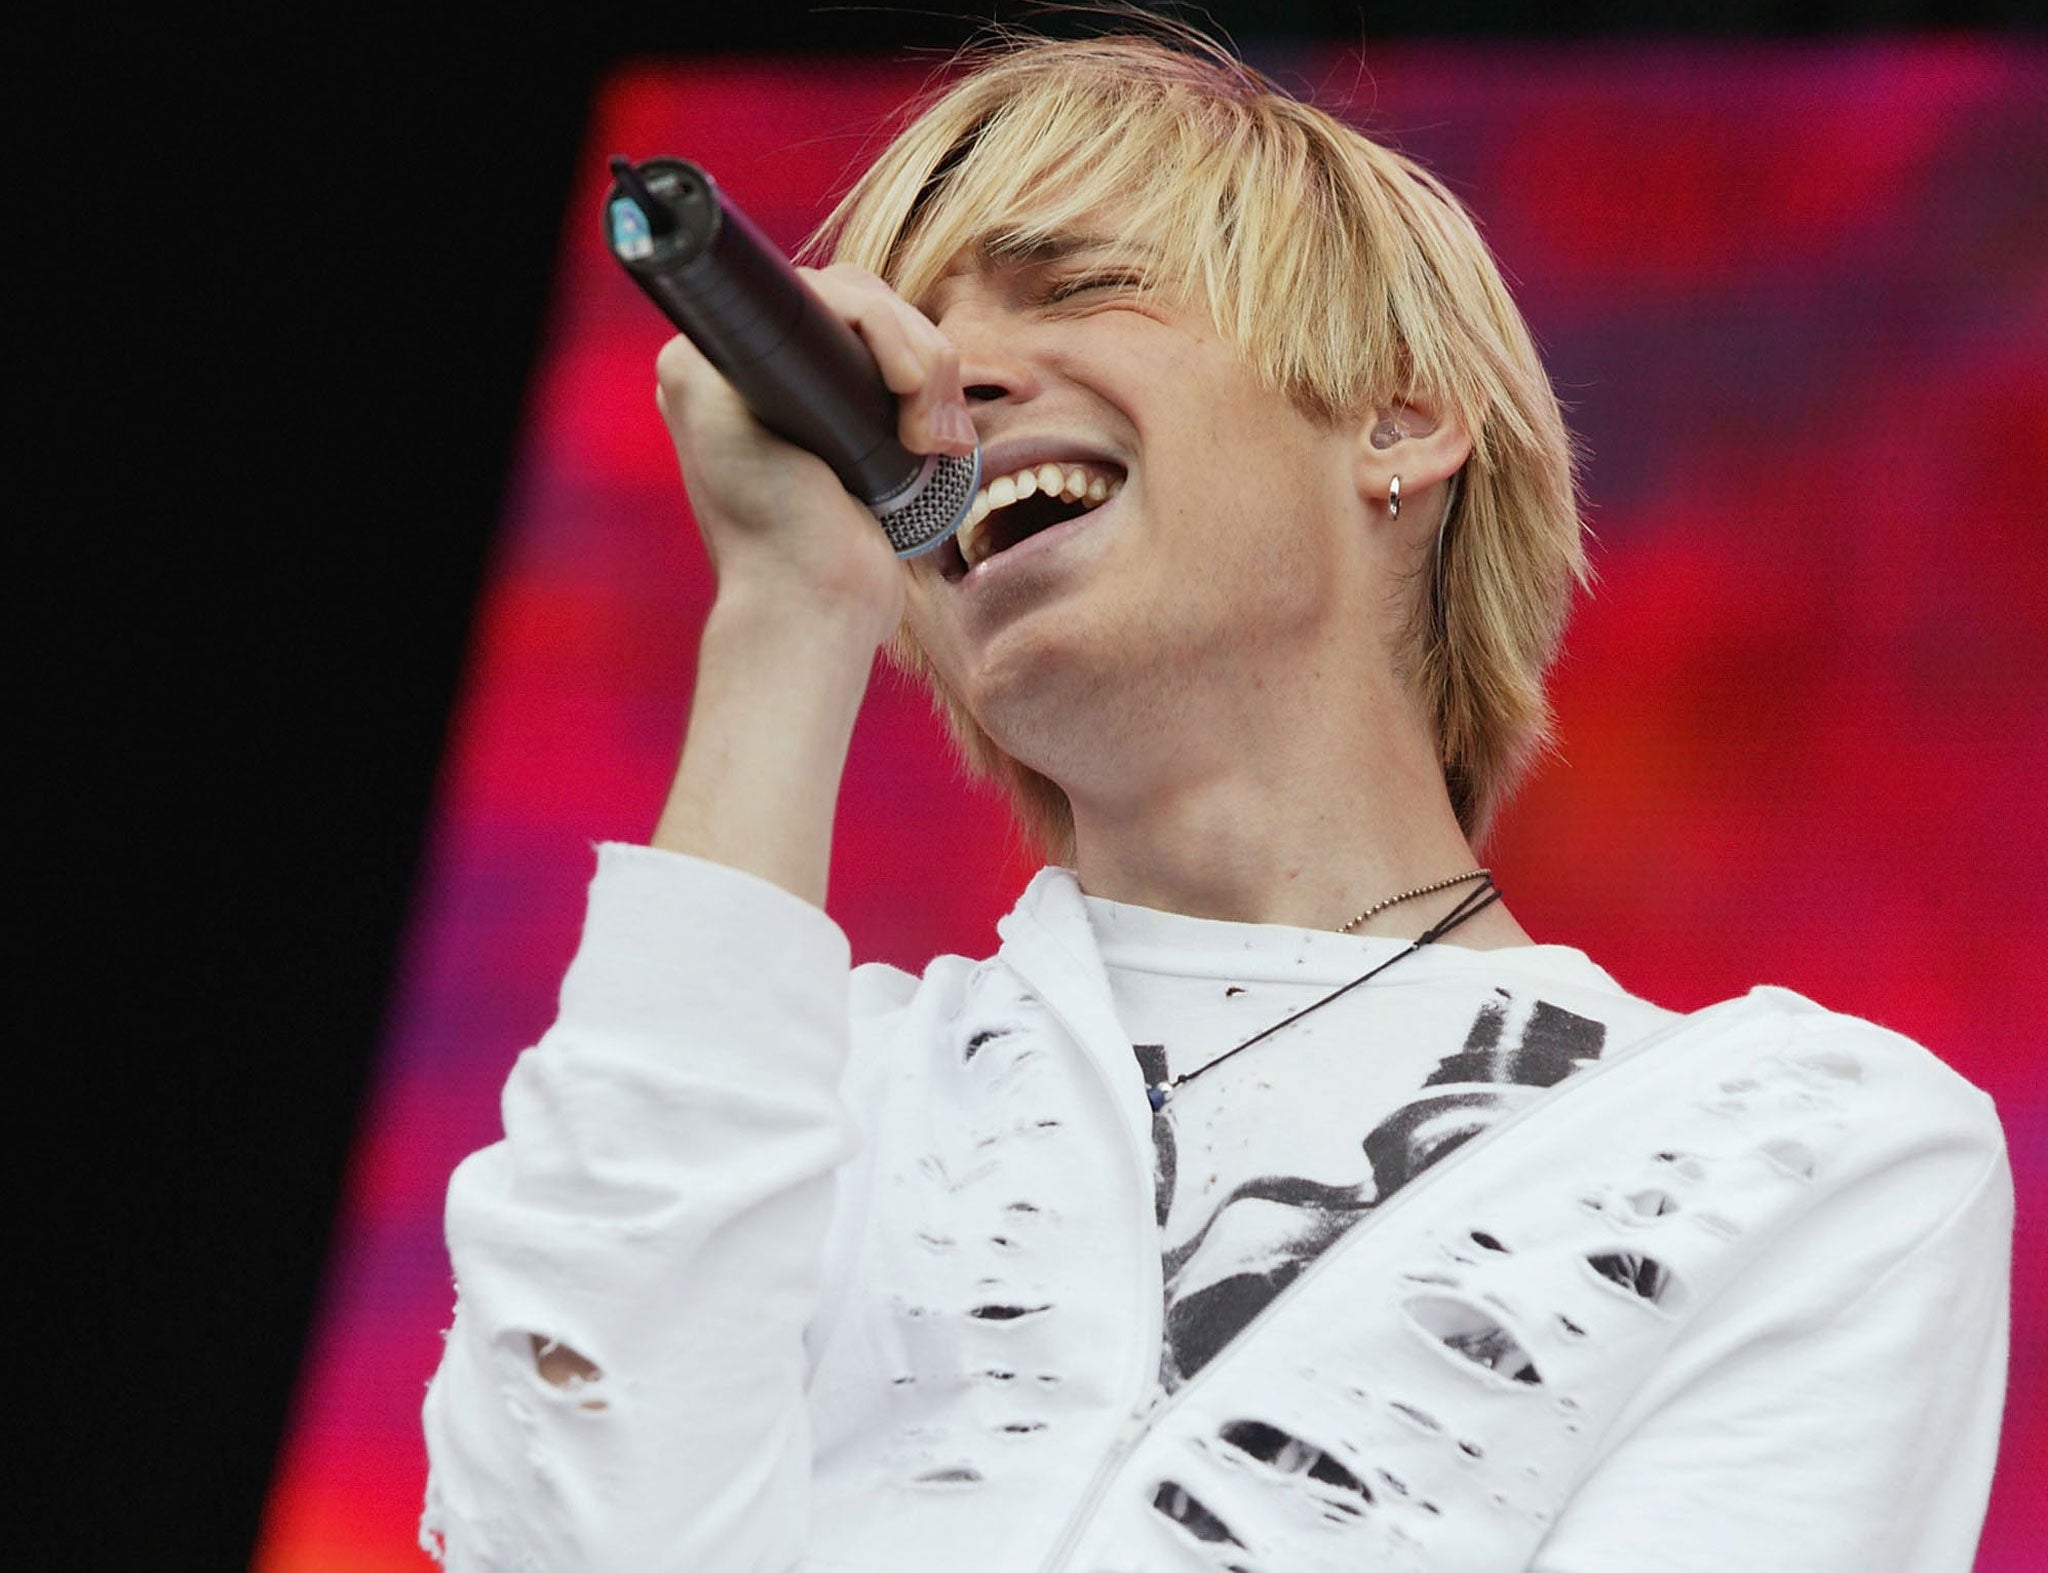 Alex Band was apparently only spared death after telling his captors he was about to become a father